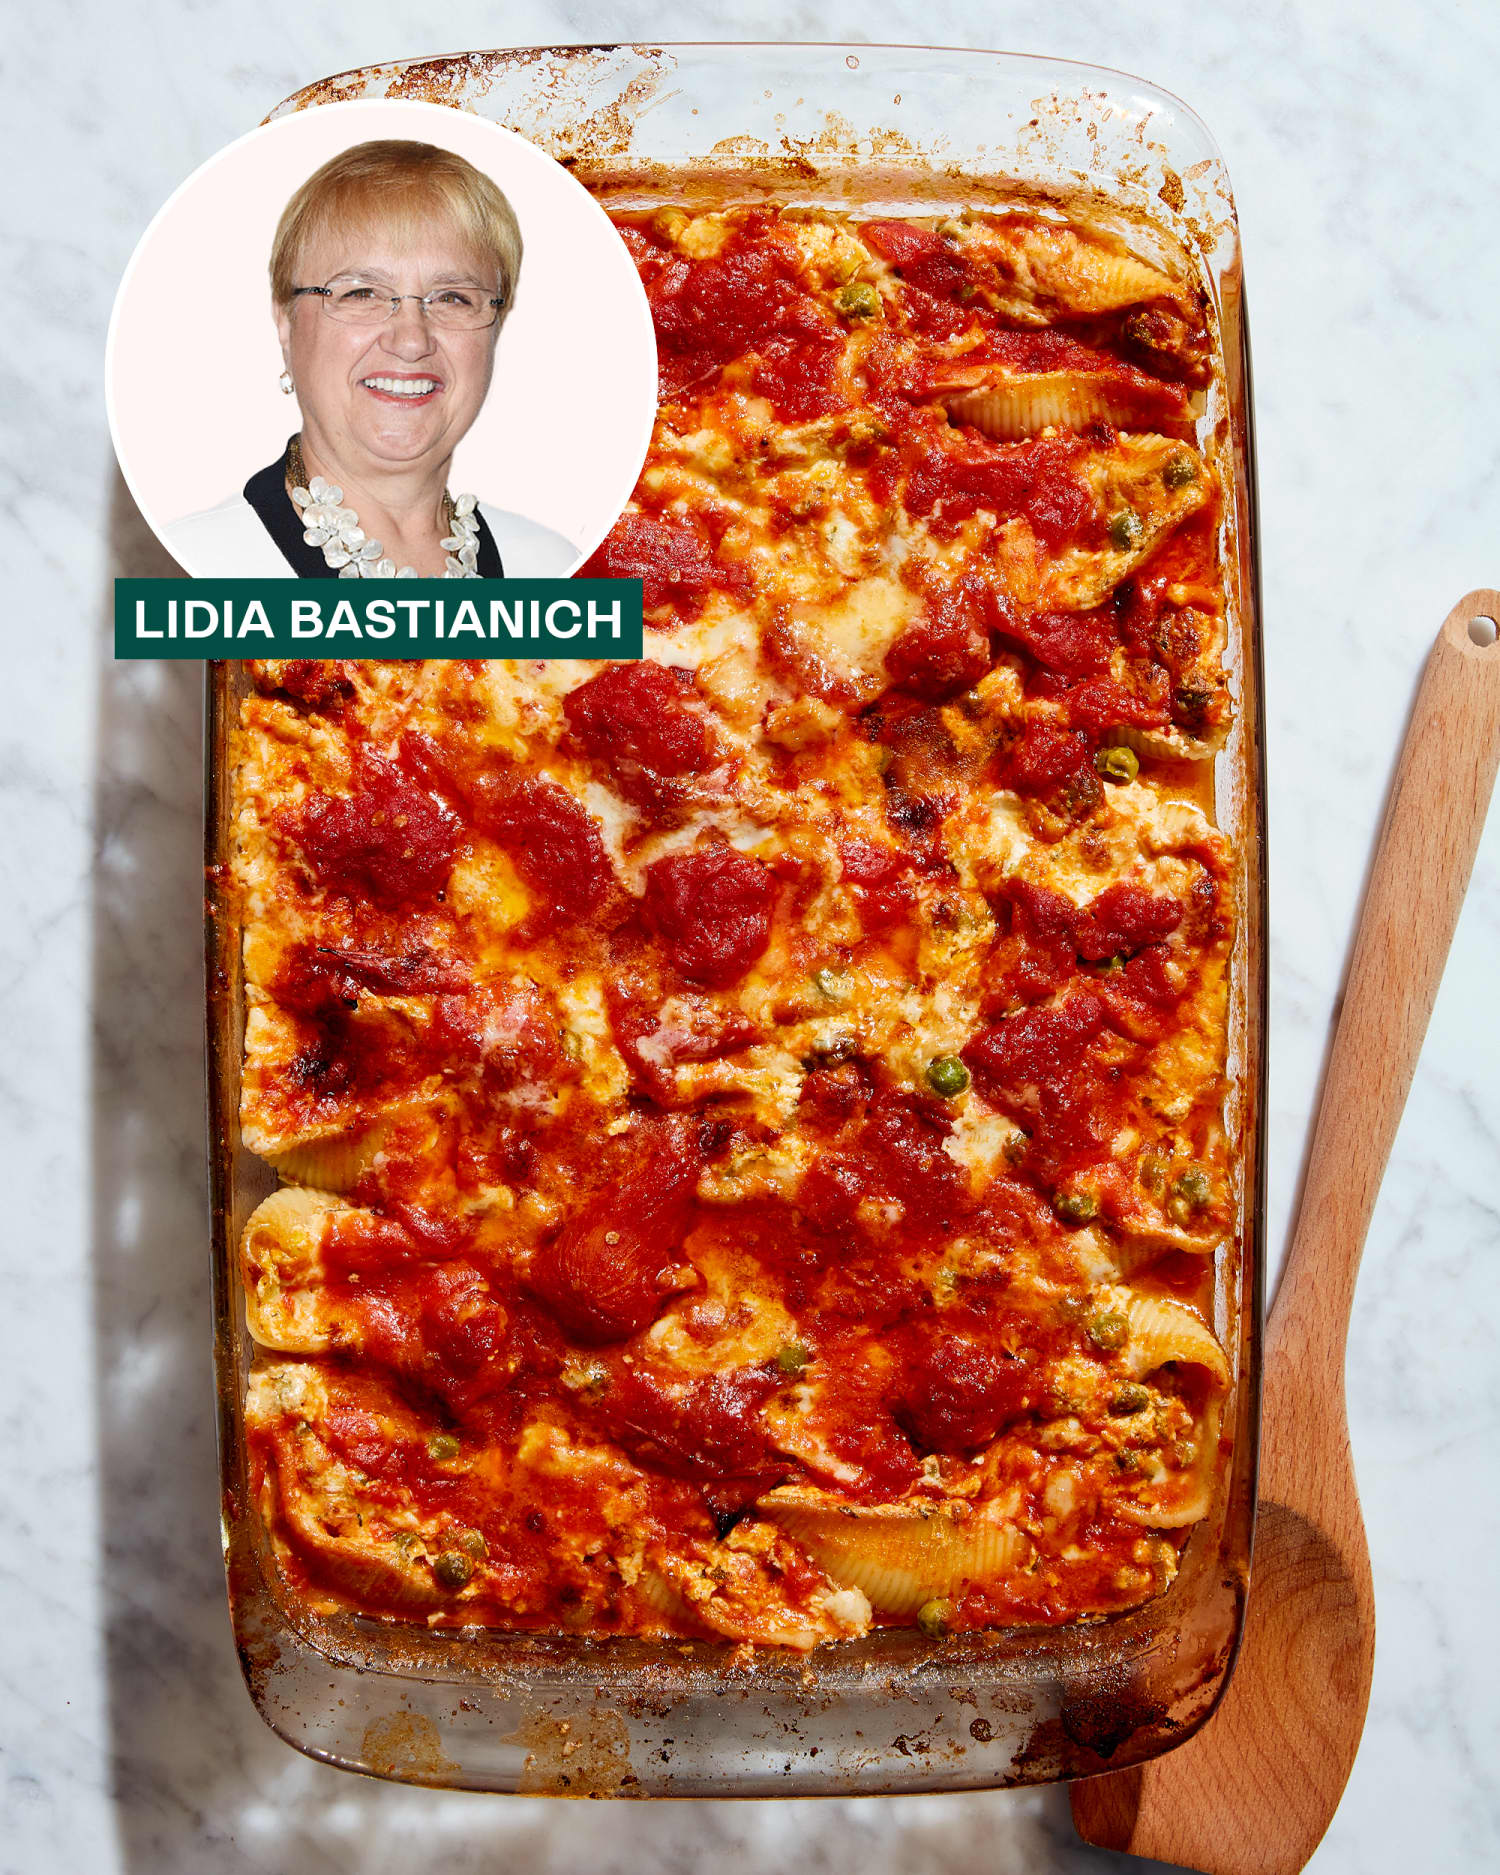 I Tried Lidia Bastianich's Stuffed Shells and They're a Cheese-Lover's Dream